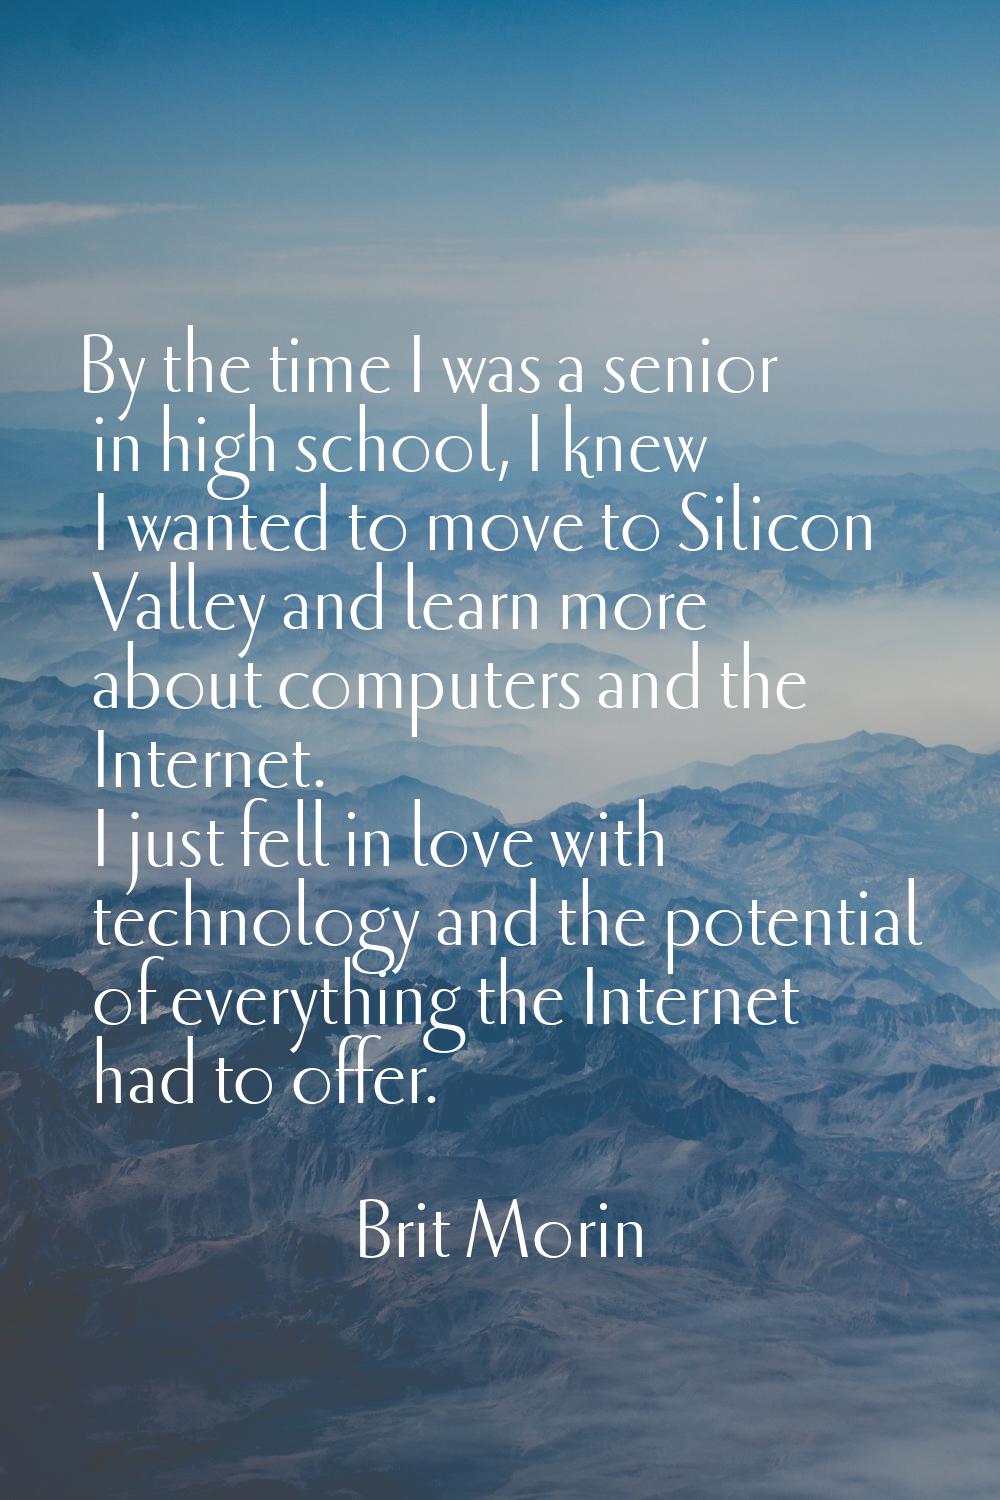 By the time I was a senior in high school, I knew I wanted to move to Silicon Valley and learn more